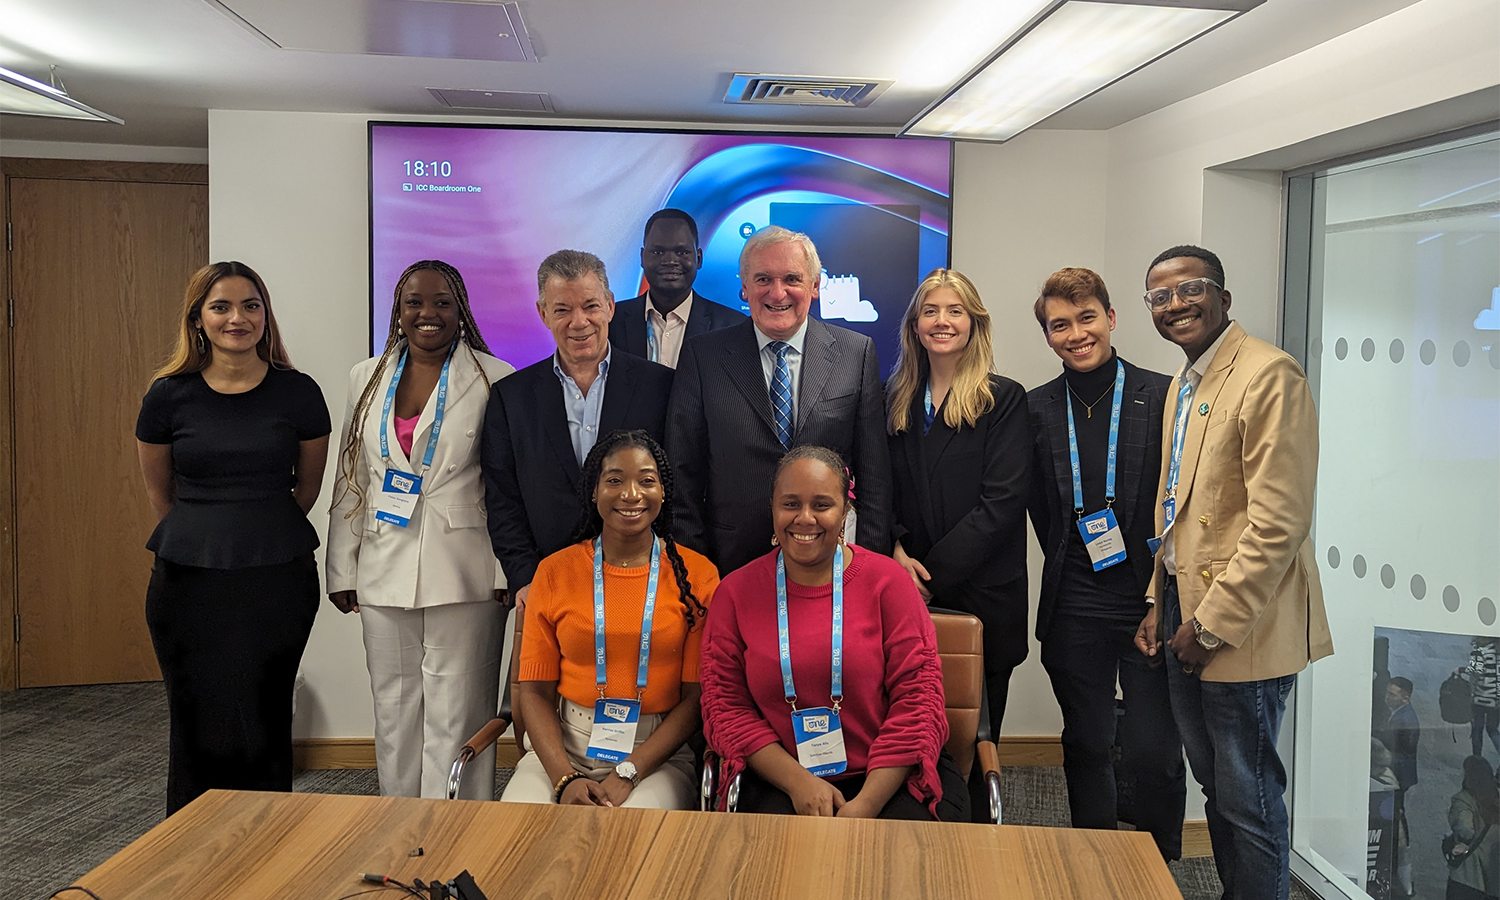 Group photograph of the OYW23 meeting between InterAction Council and One Young World Ambassadors, with Bertie Ahern and Juan Manuel Santos